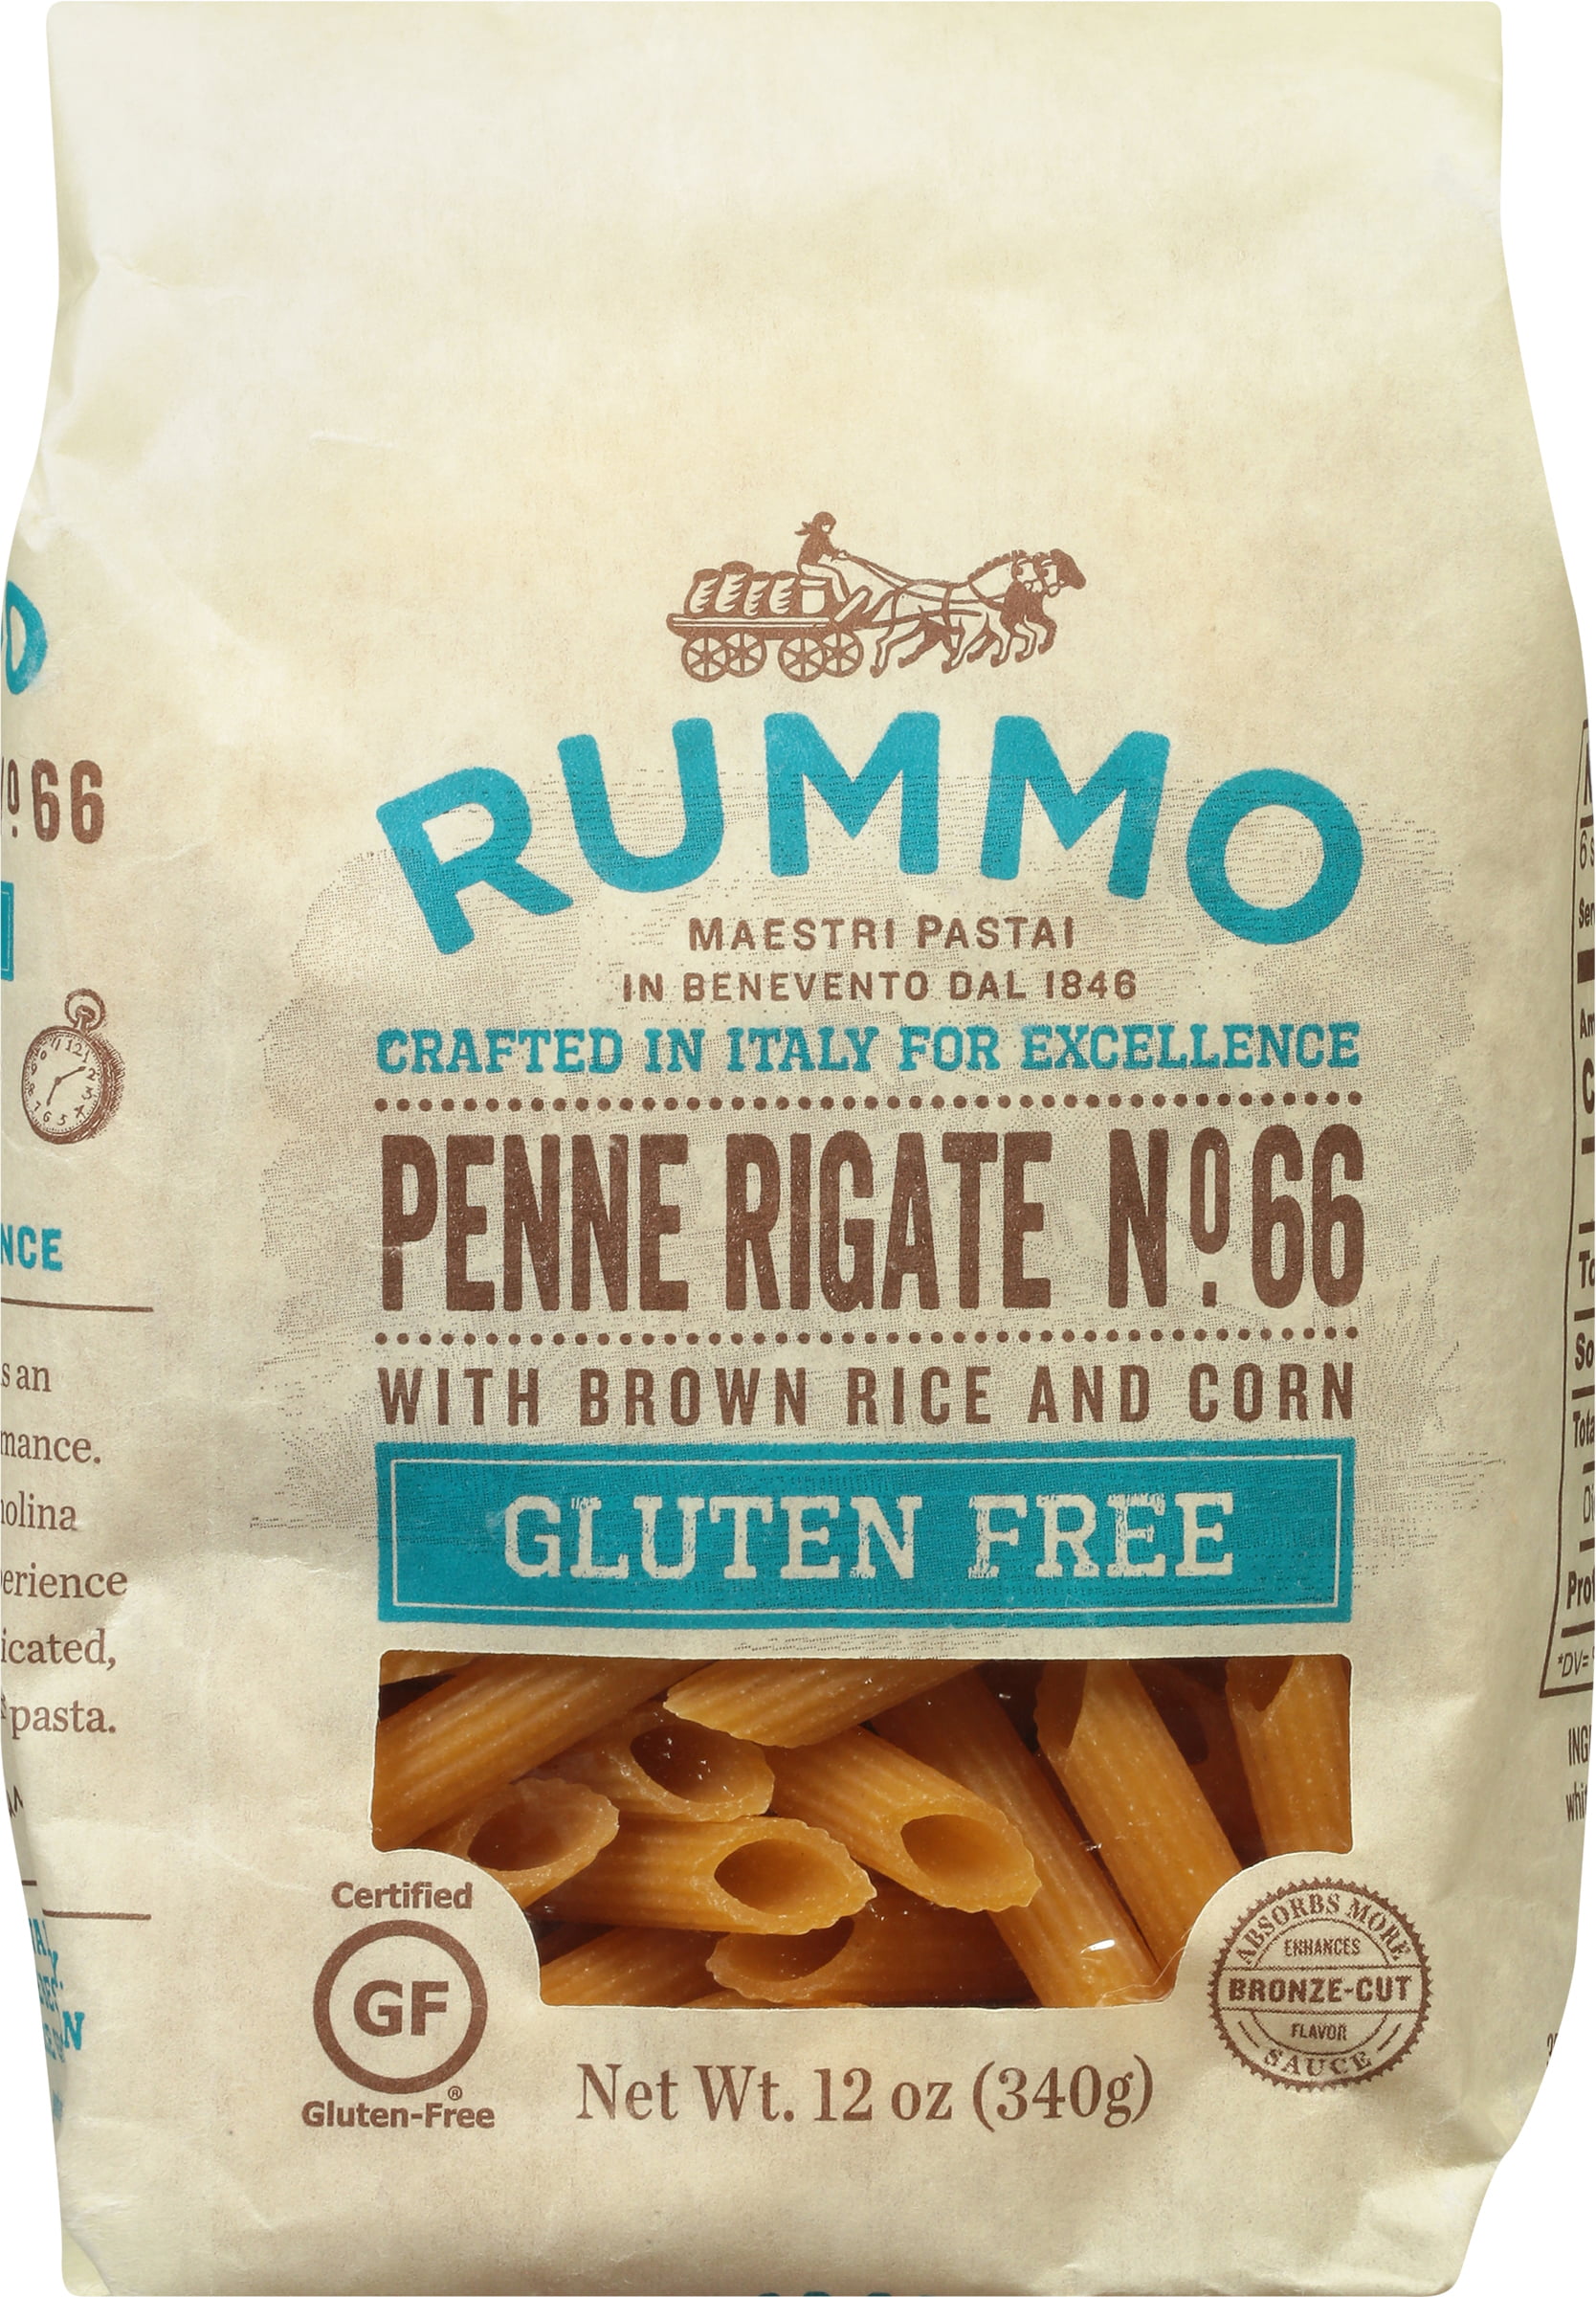 Rummo - Pasta Fusilli - Case of 12-16 oz., 12 Pack/16 Ounce Each - Ralphs